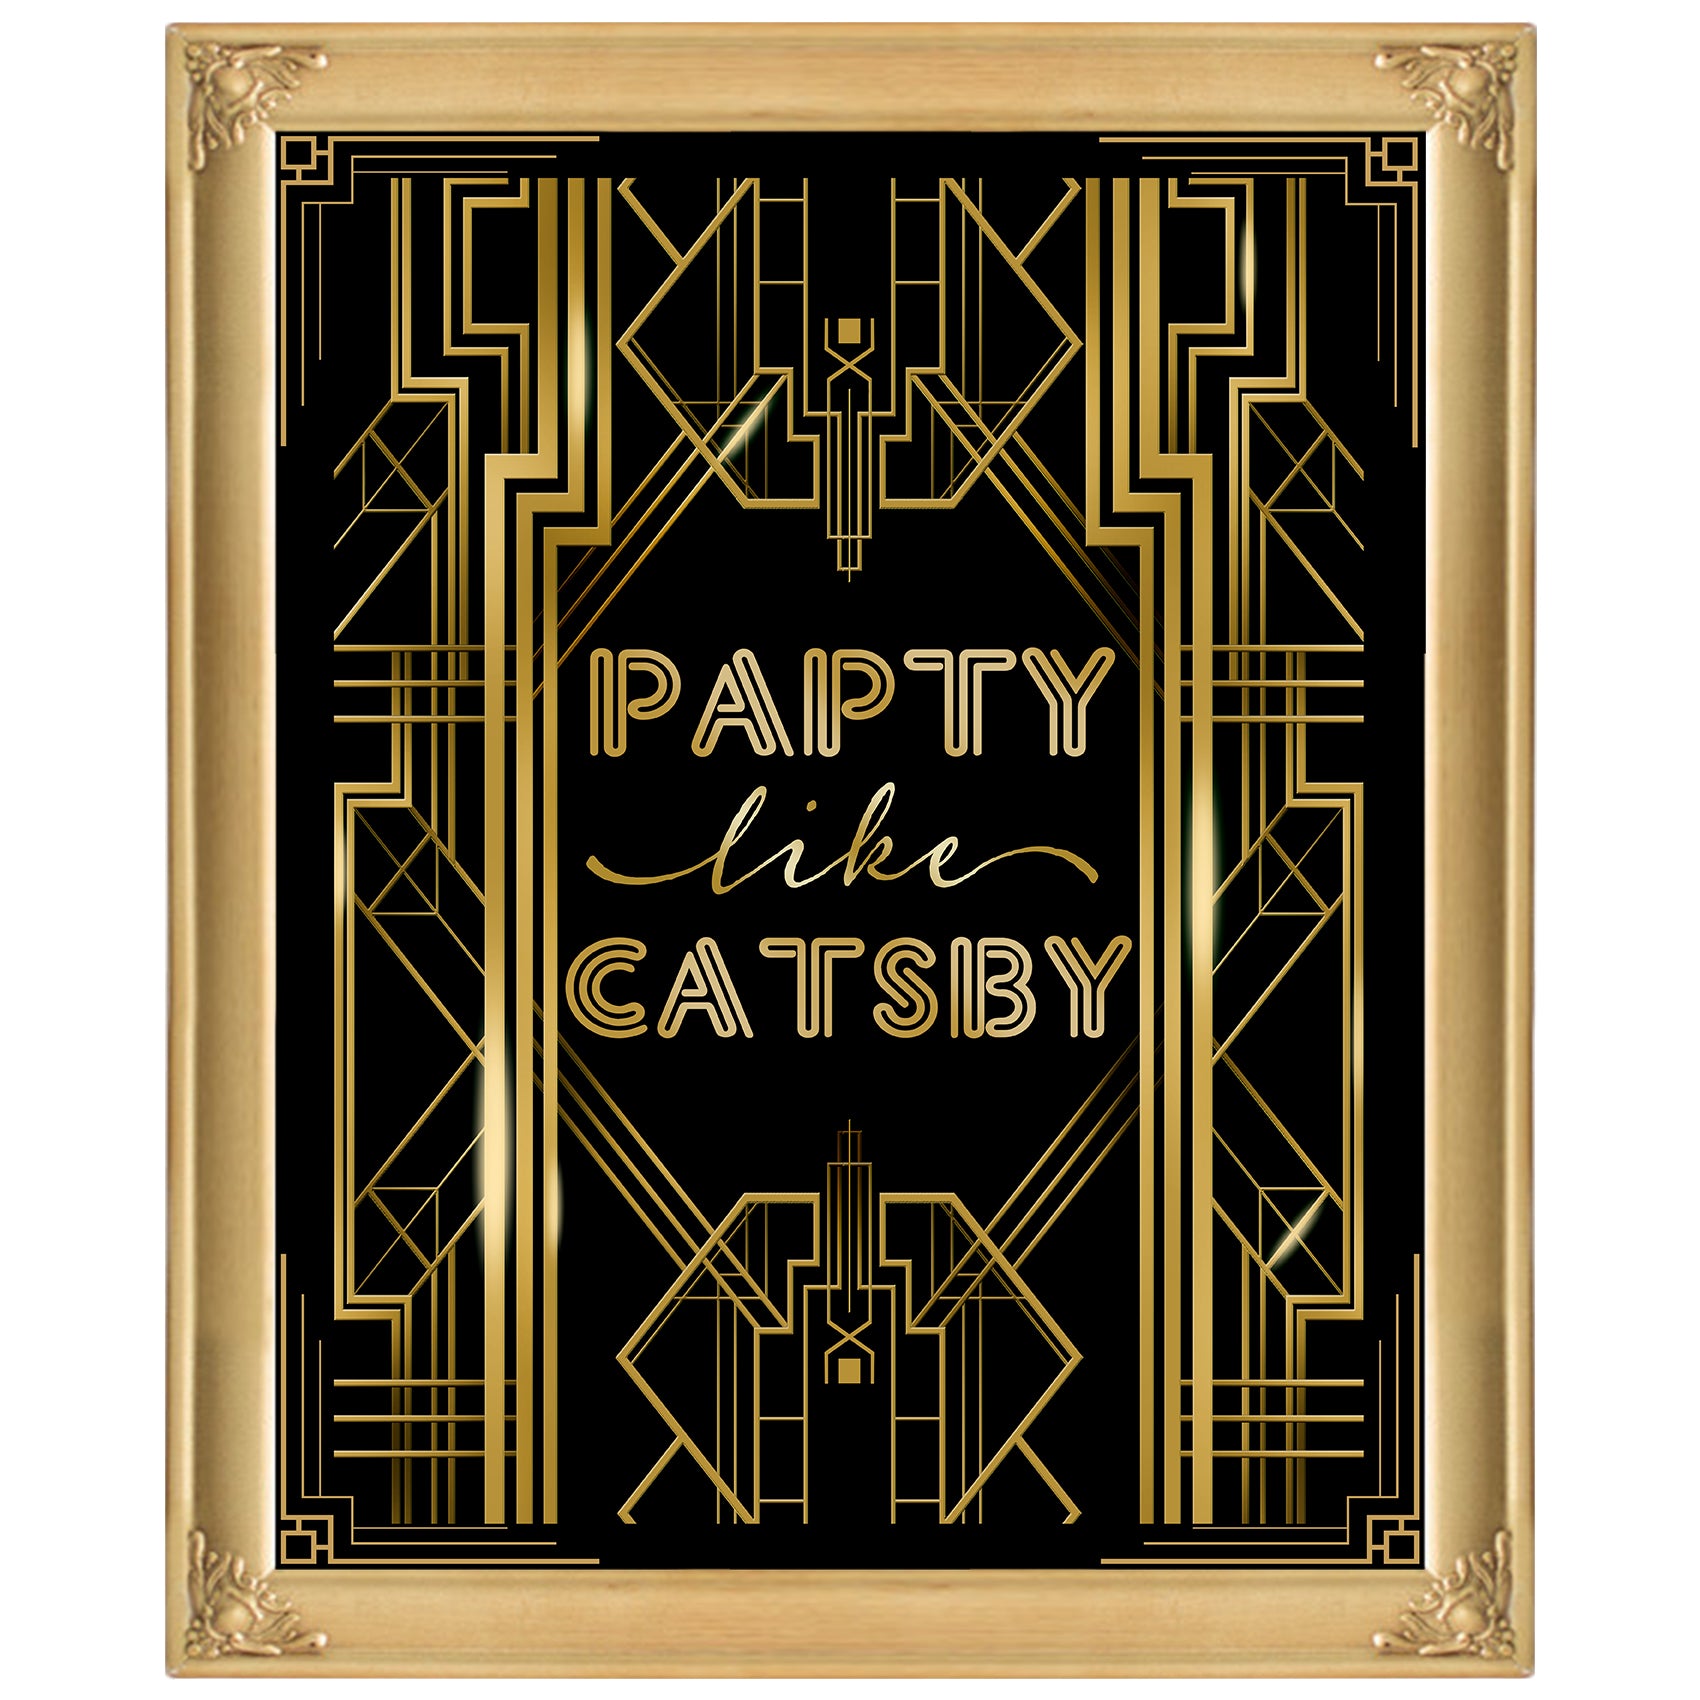 Roaring 20s Gatsby Party Like Gatsby Poster Photo Booth Props Sign 16x12inch A3